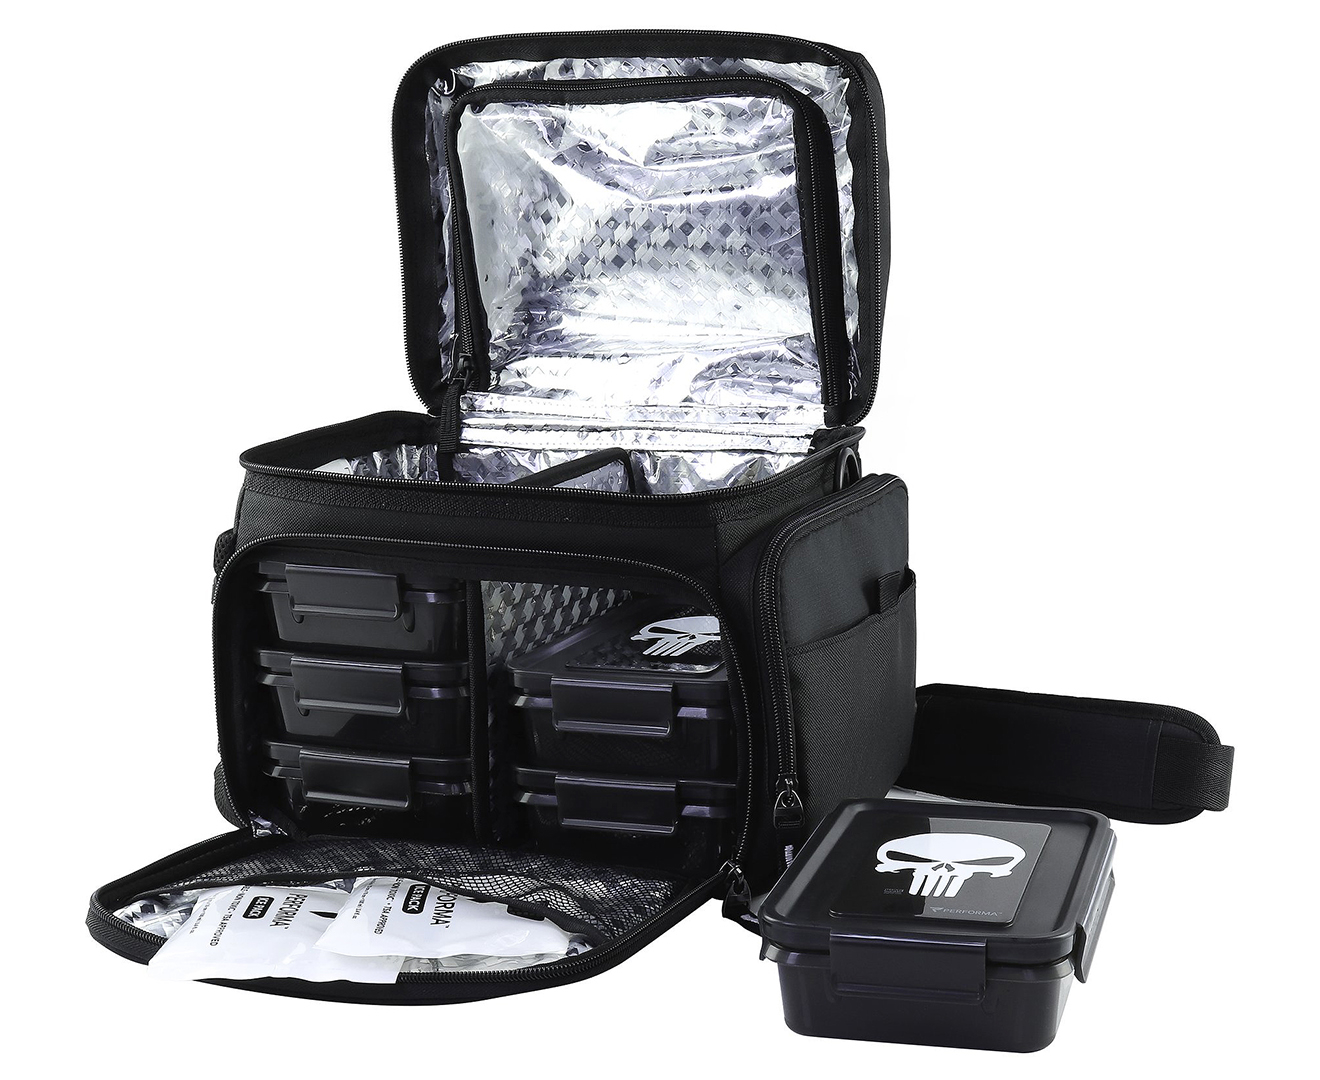 Performa 6 Meal Prep and Fitness Bag - Punisher, Includes six pack of  containers